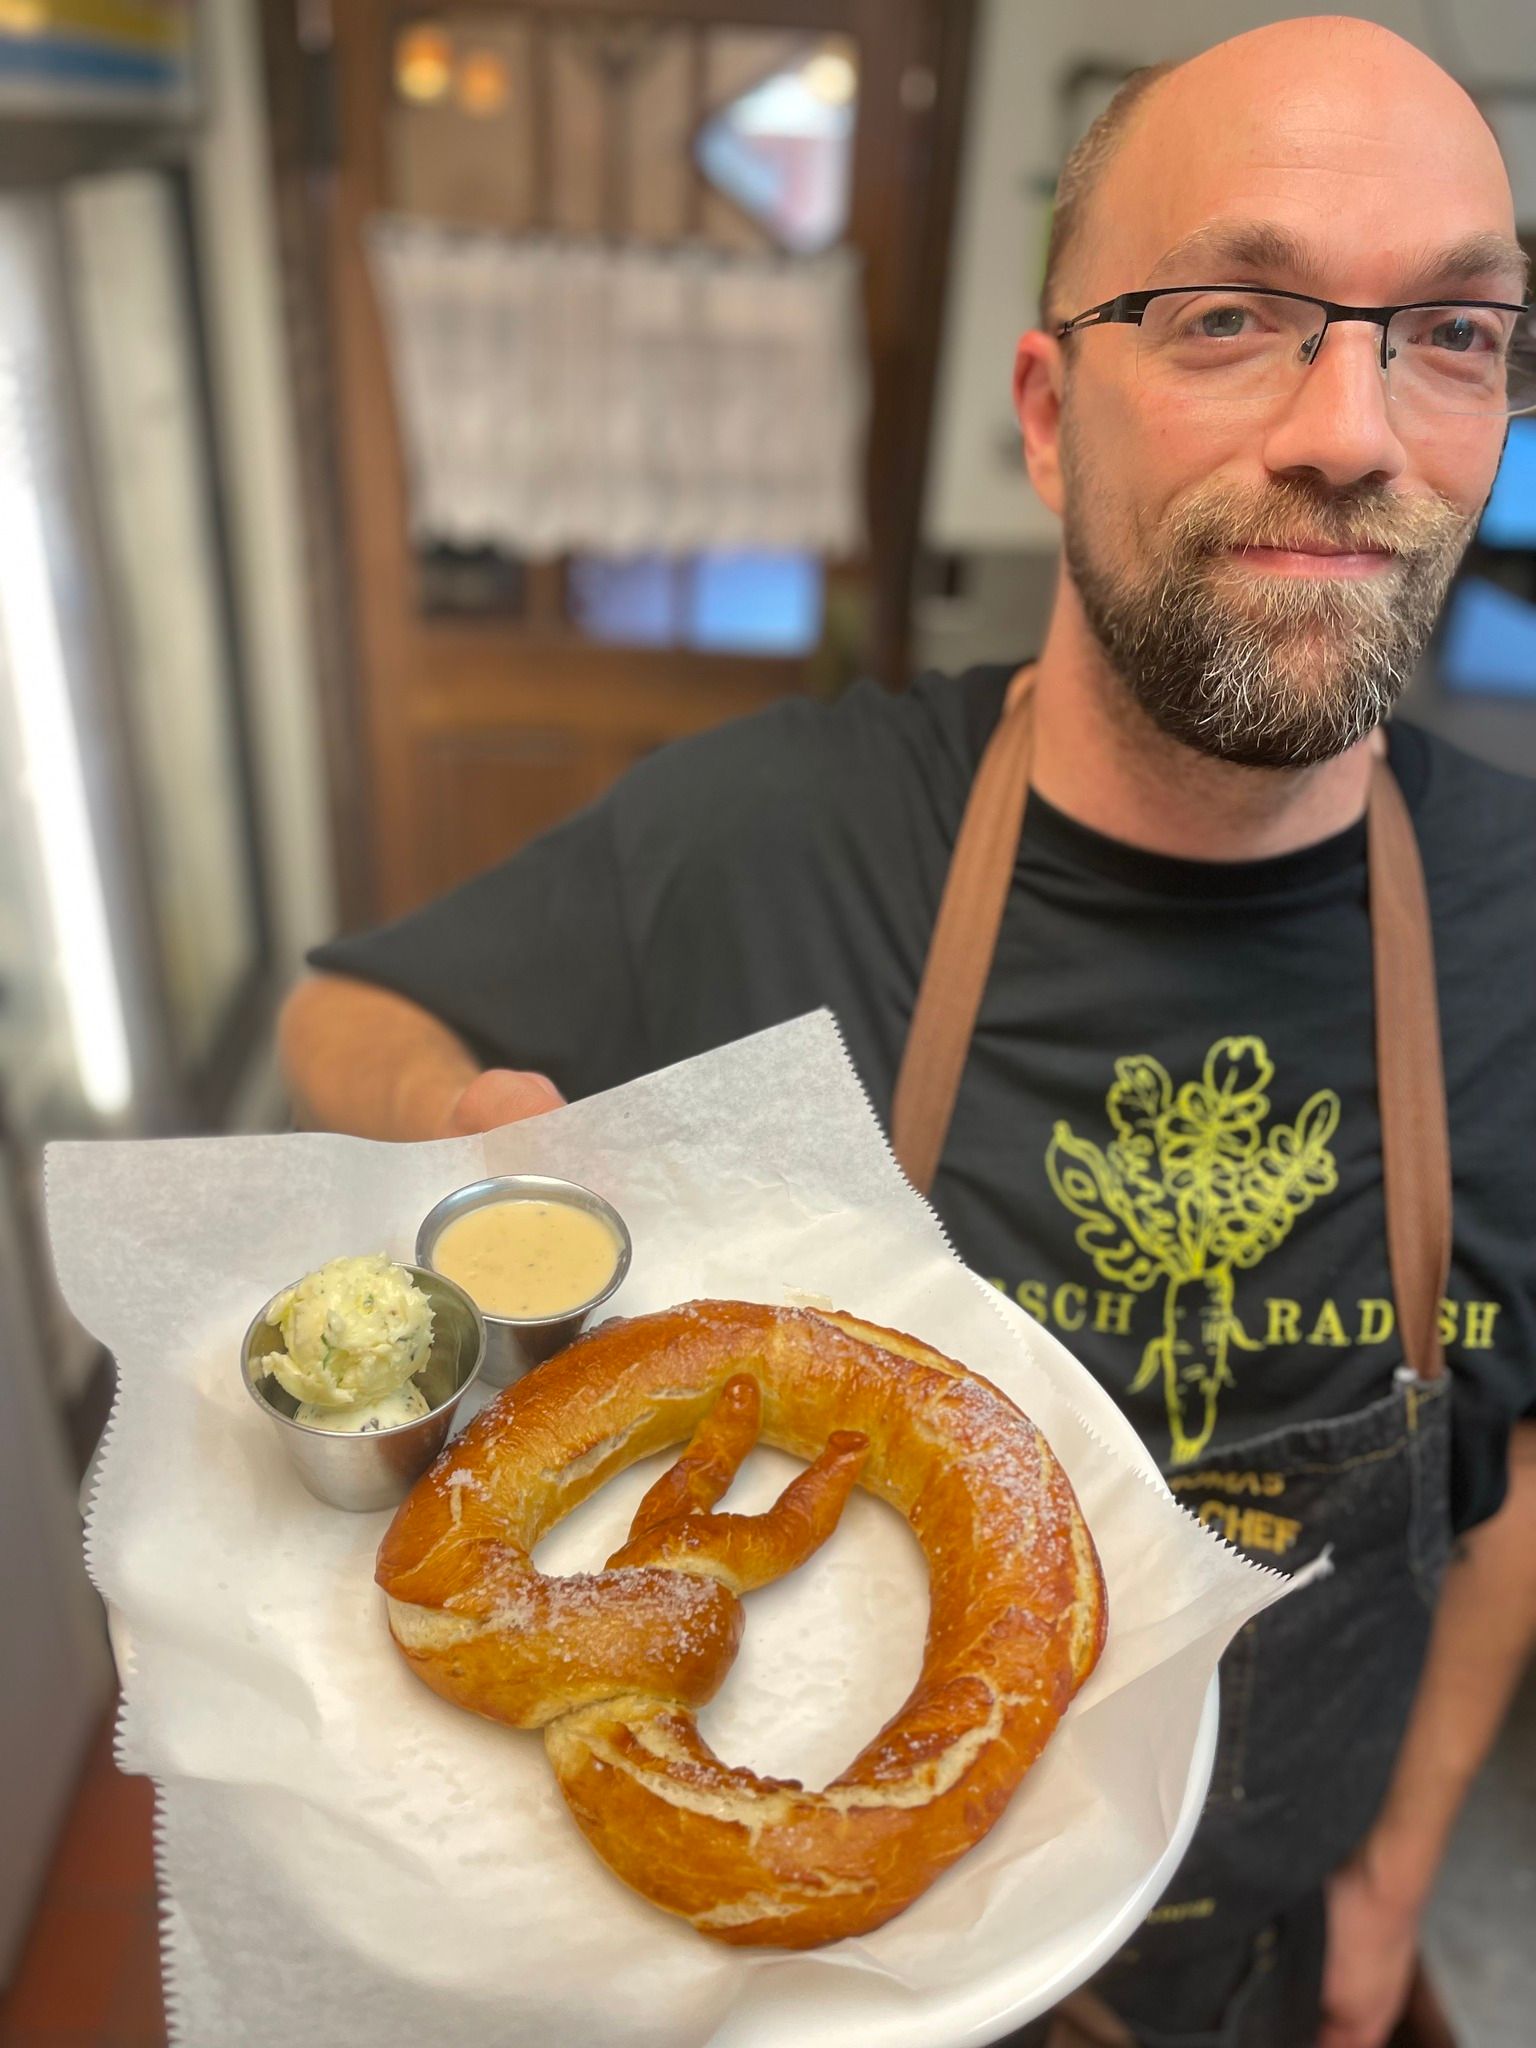 A chef at Horsh Radish in Gibson City, Illinois holds a single pretzel with two cups of dips. Photo by Horsh Radishâ€™s Facebook page.